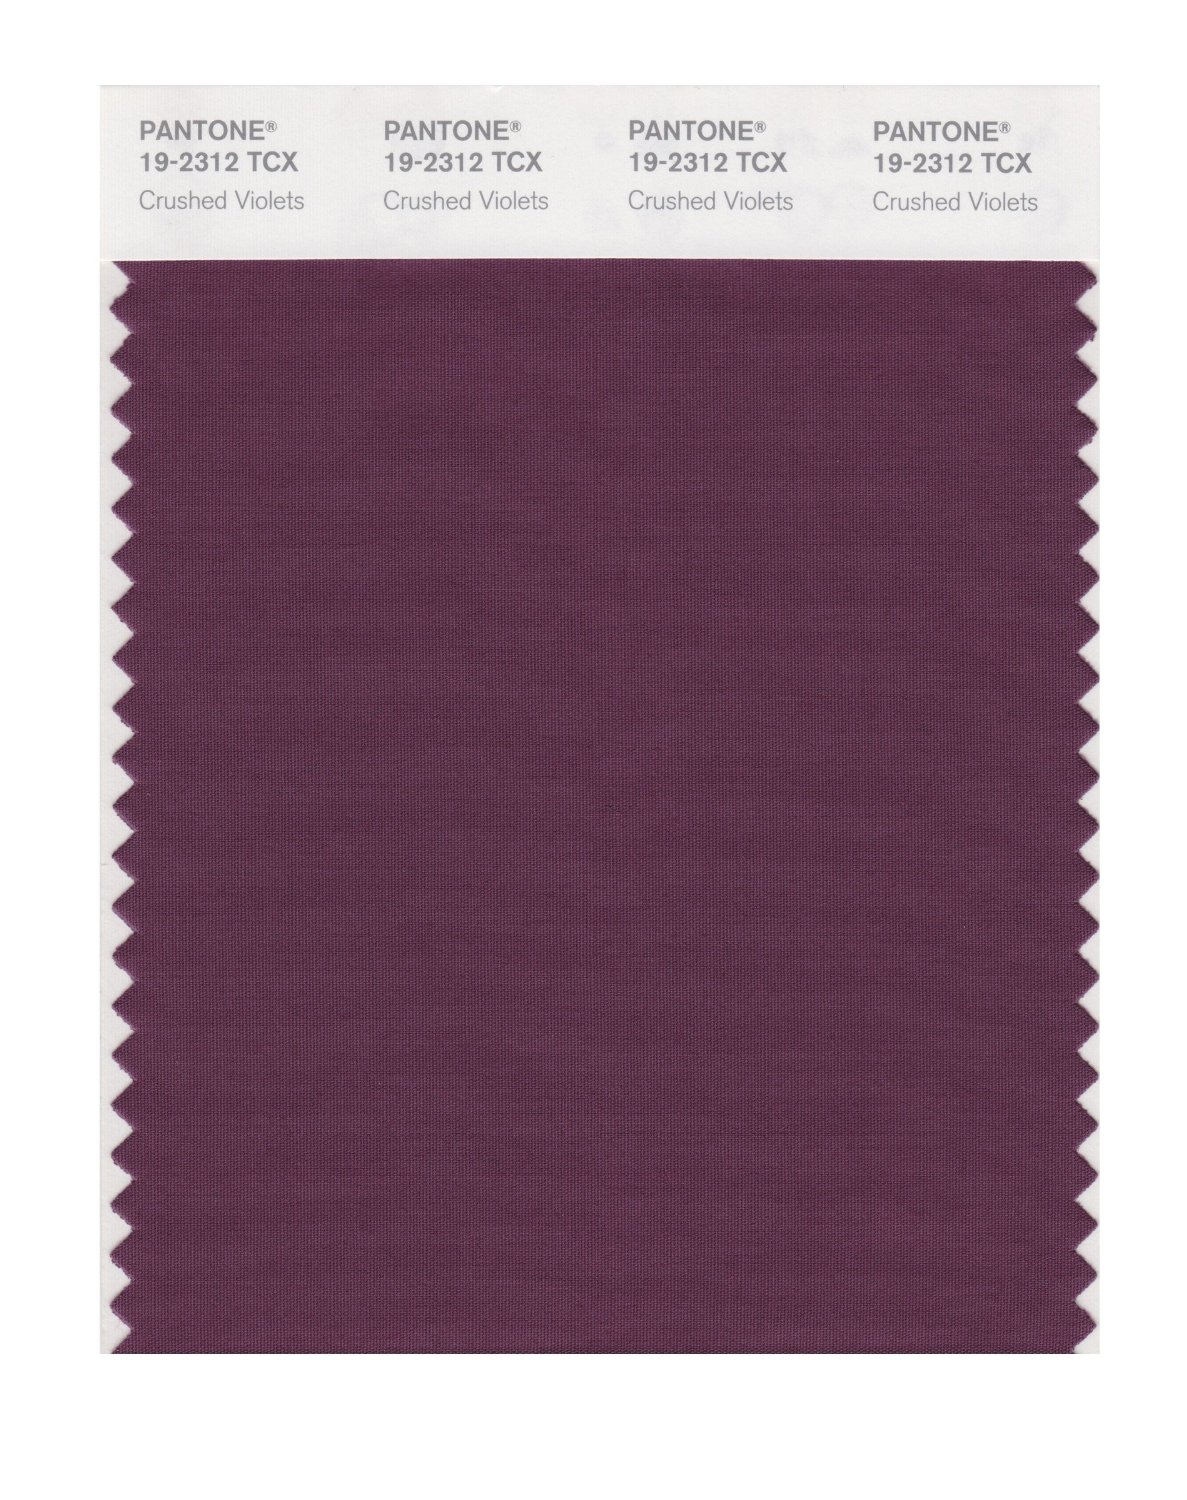 Pantone Cotton Swatch 19-2312 Crushed Violets